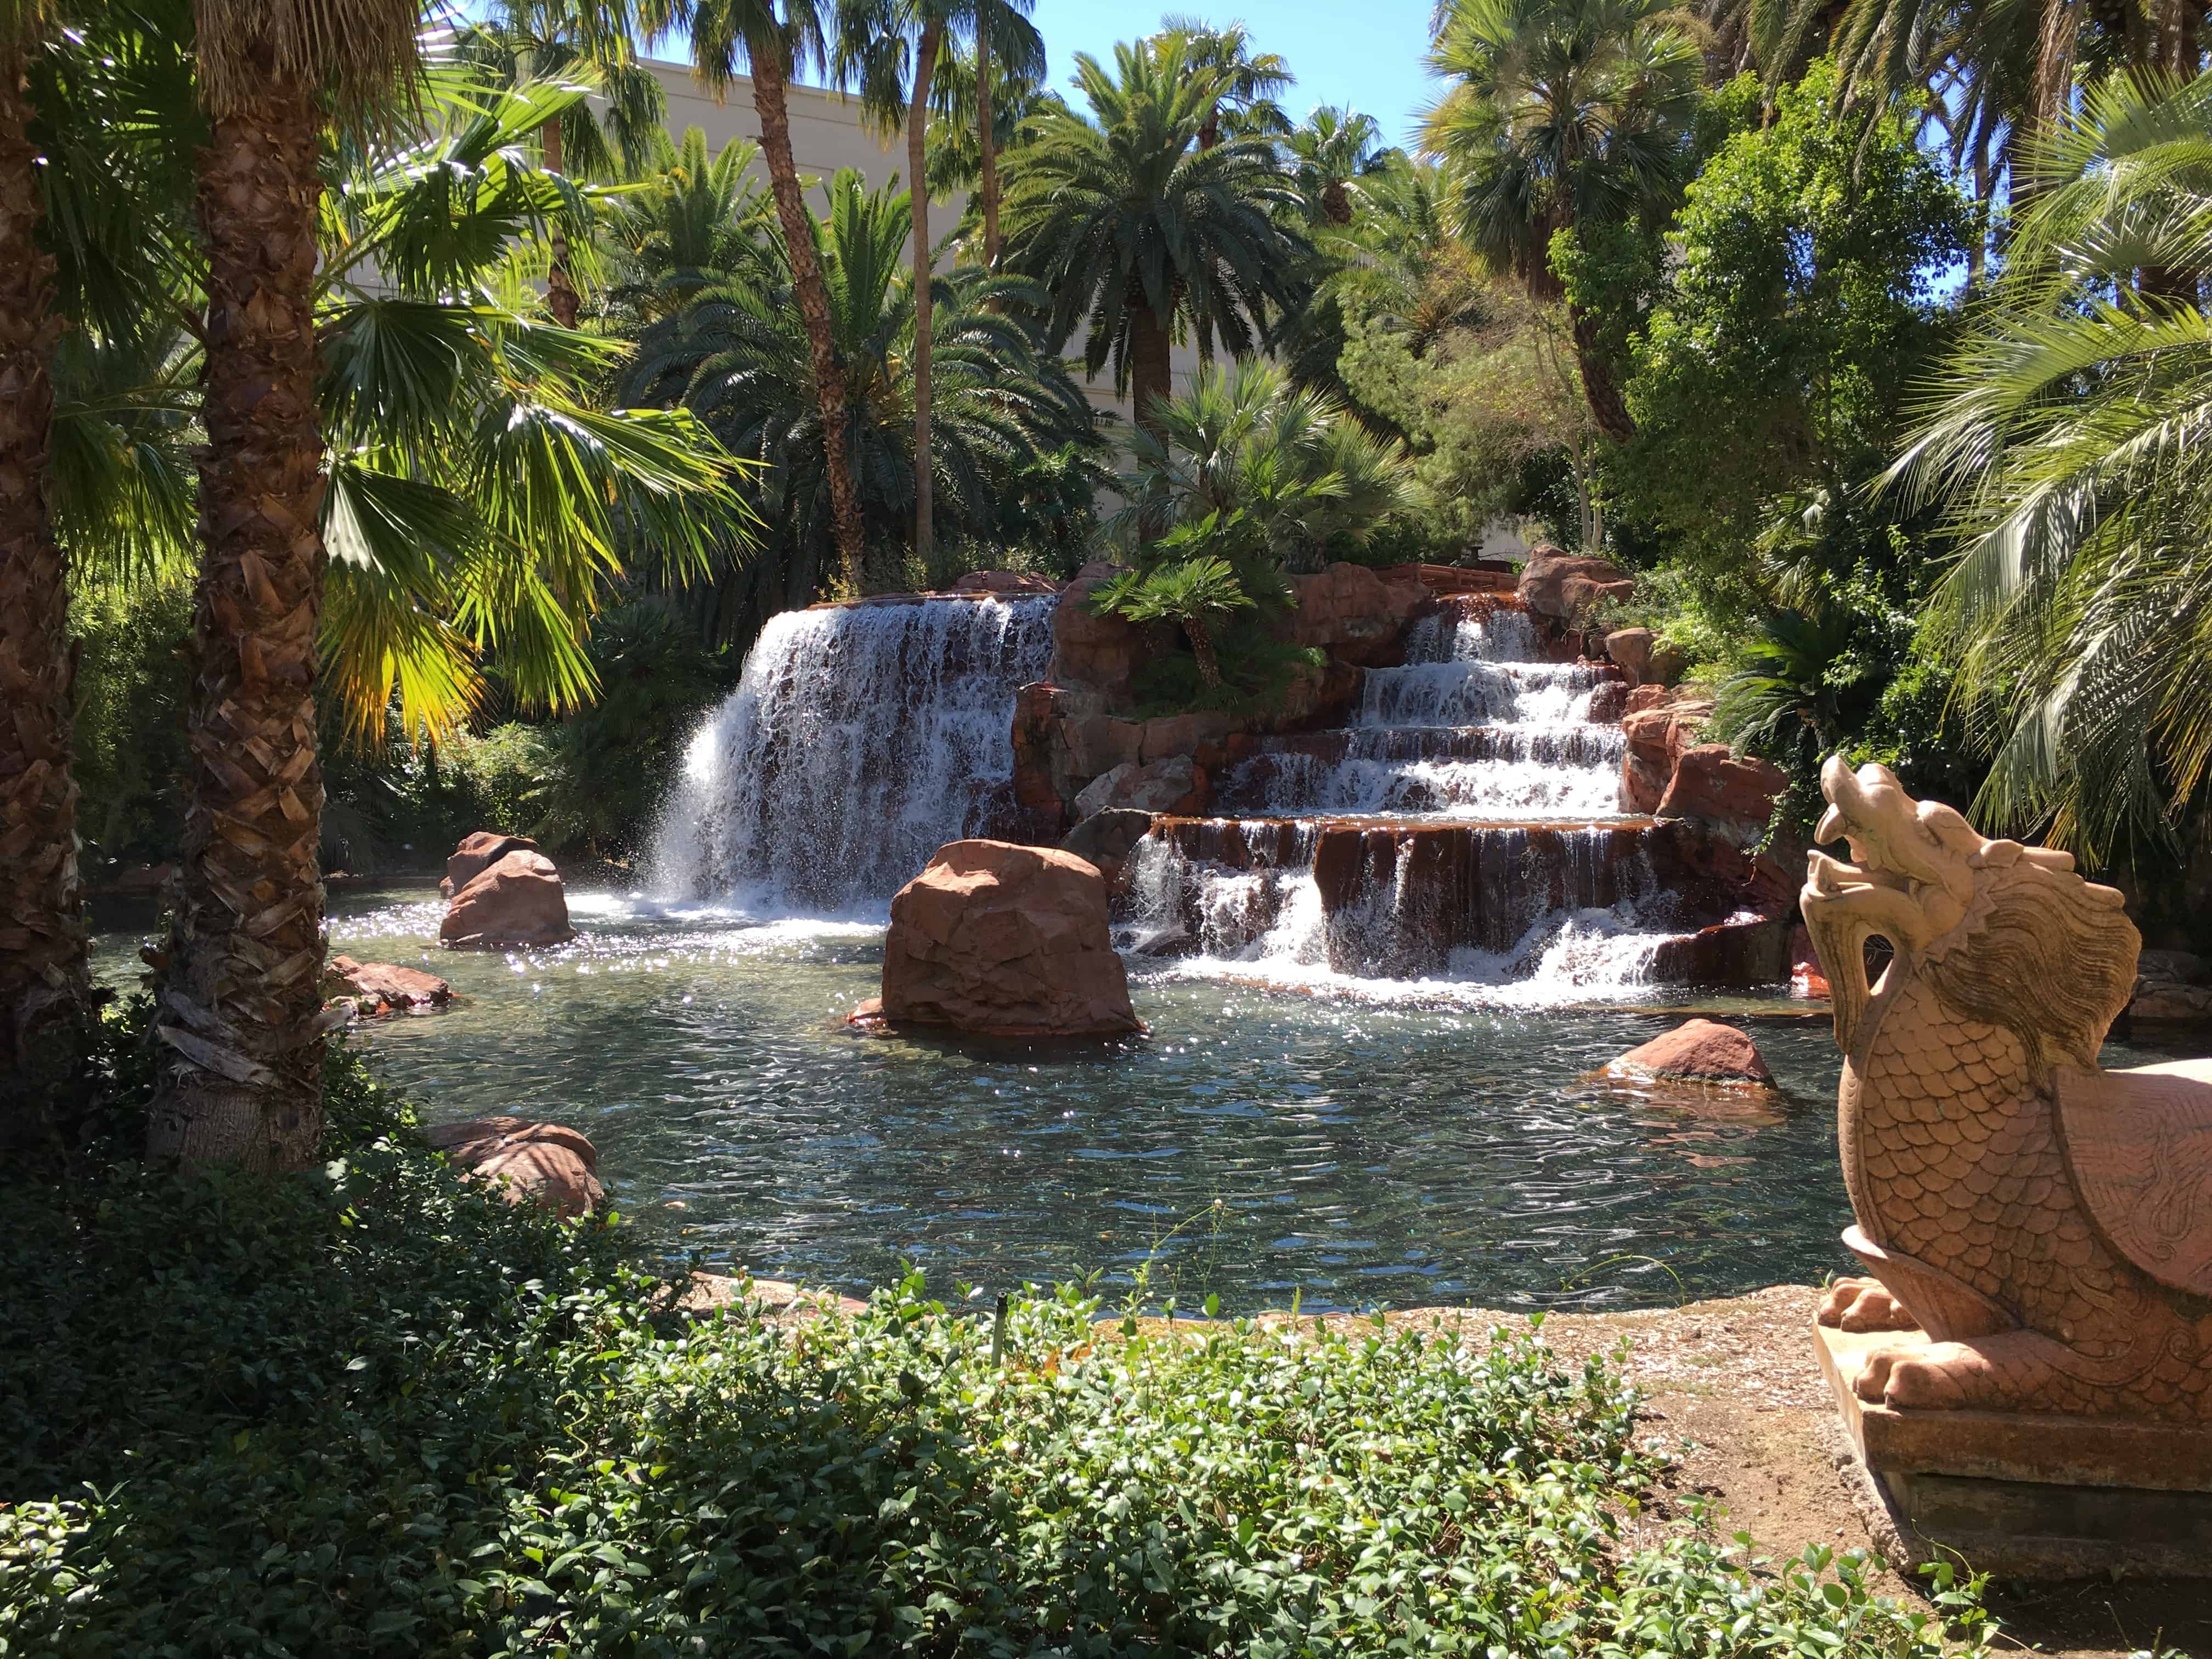 Along the path to the entrance at the Mirage in Las Vegas, Nevada